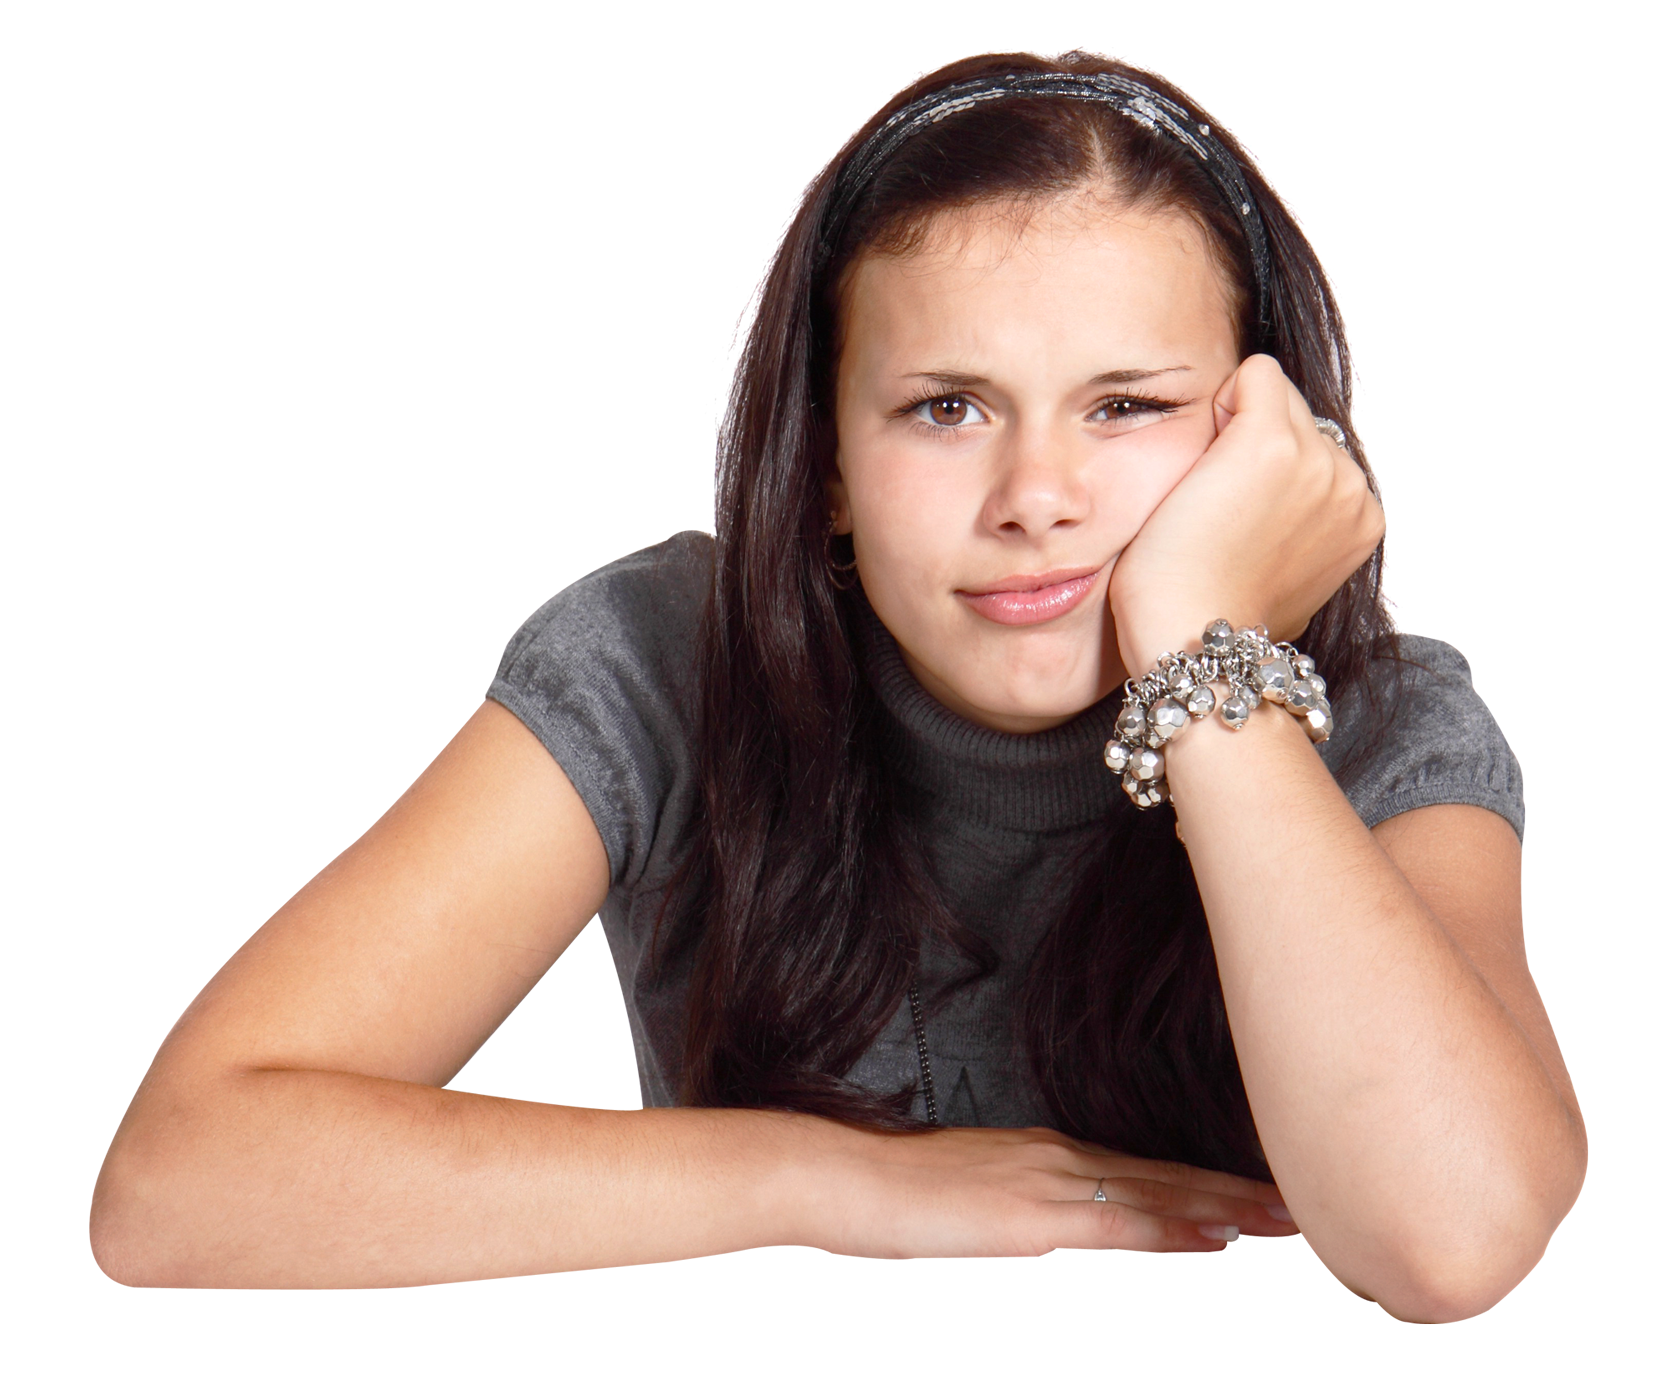 Young Woman Looking Bored and Thinking PNG Image - PngPix